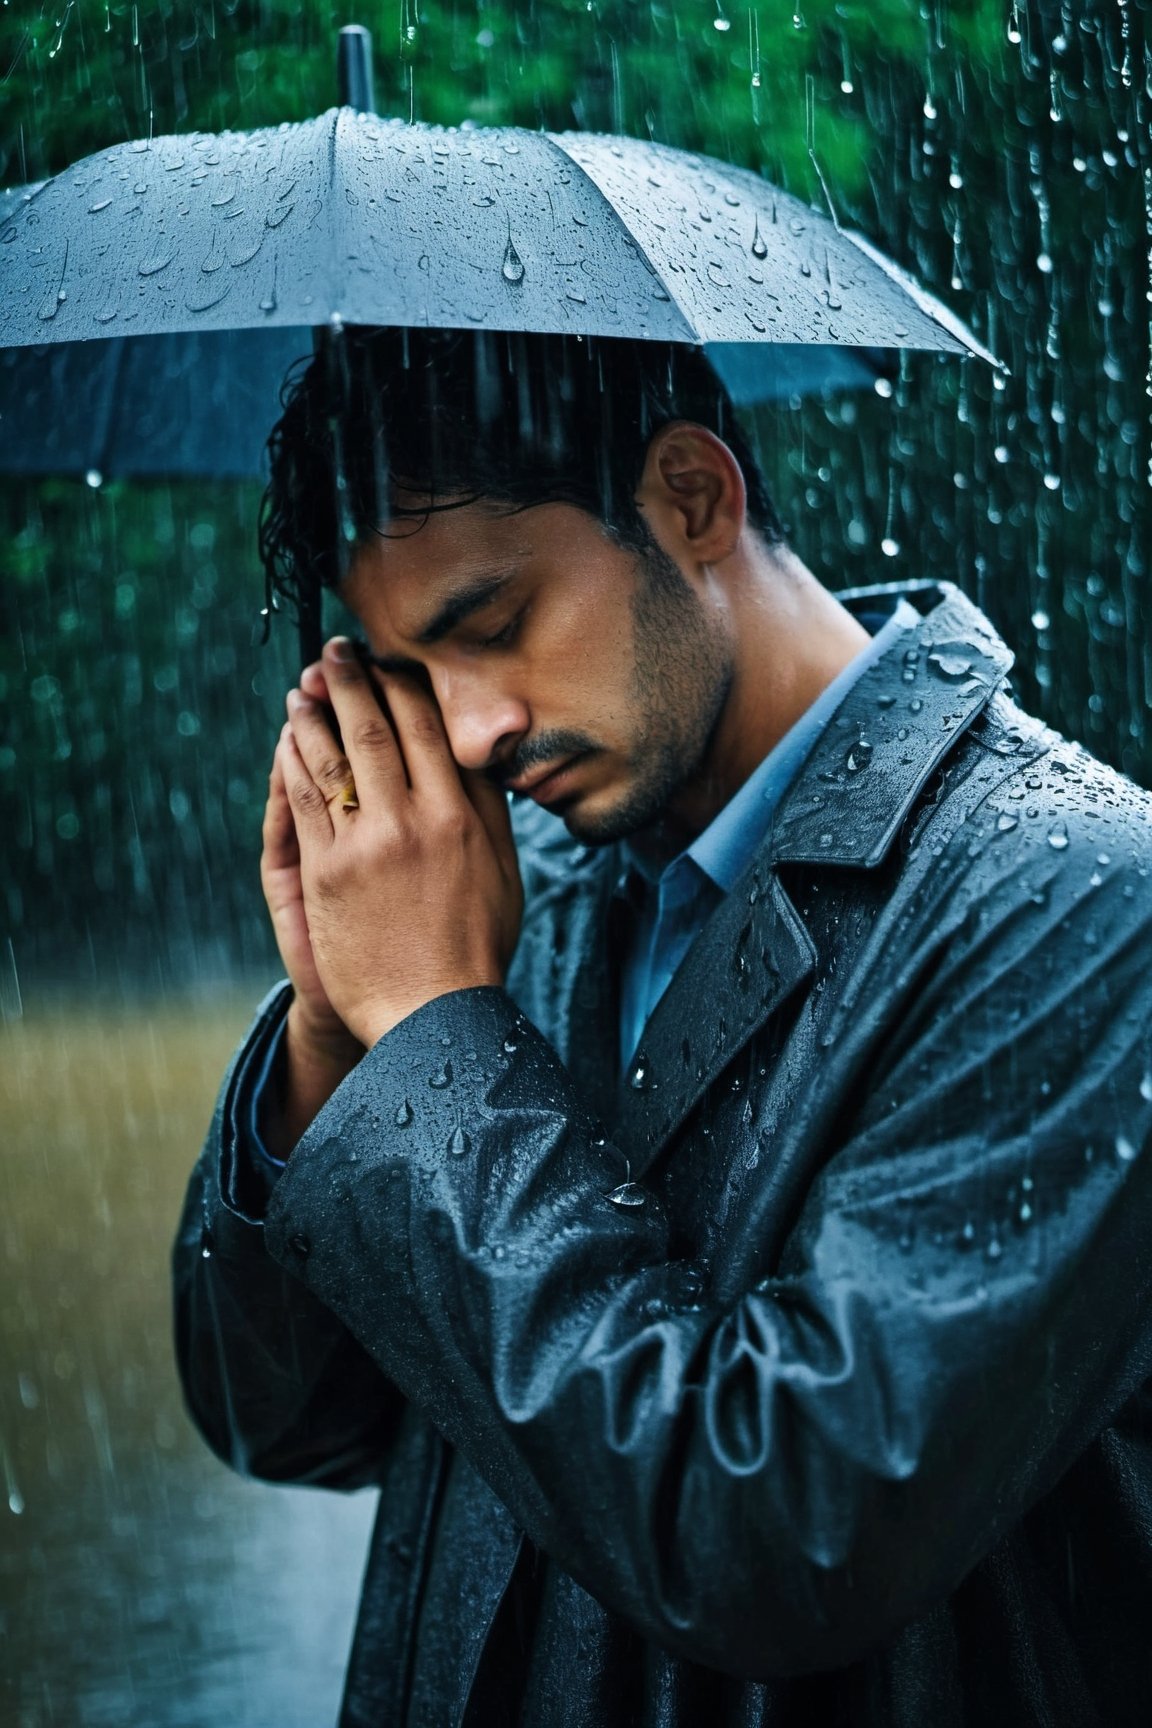 sadness man under the rain, consumed by sadness, pouring rain, intertwining raindrops and tears, weight of despair, hazy world, gloom, rhythmic patter of raindrops, sense of sadness and isolation